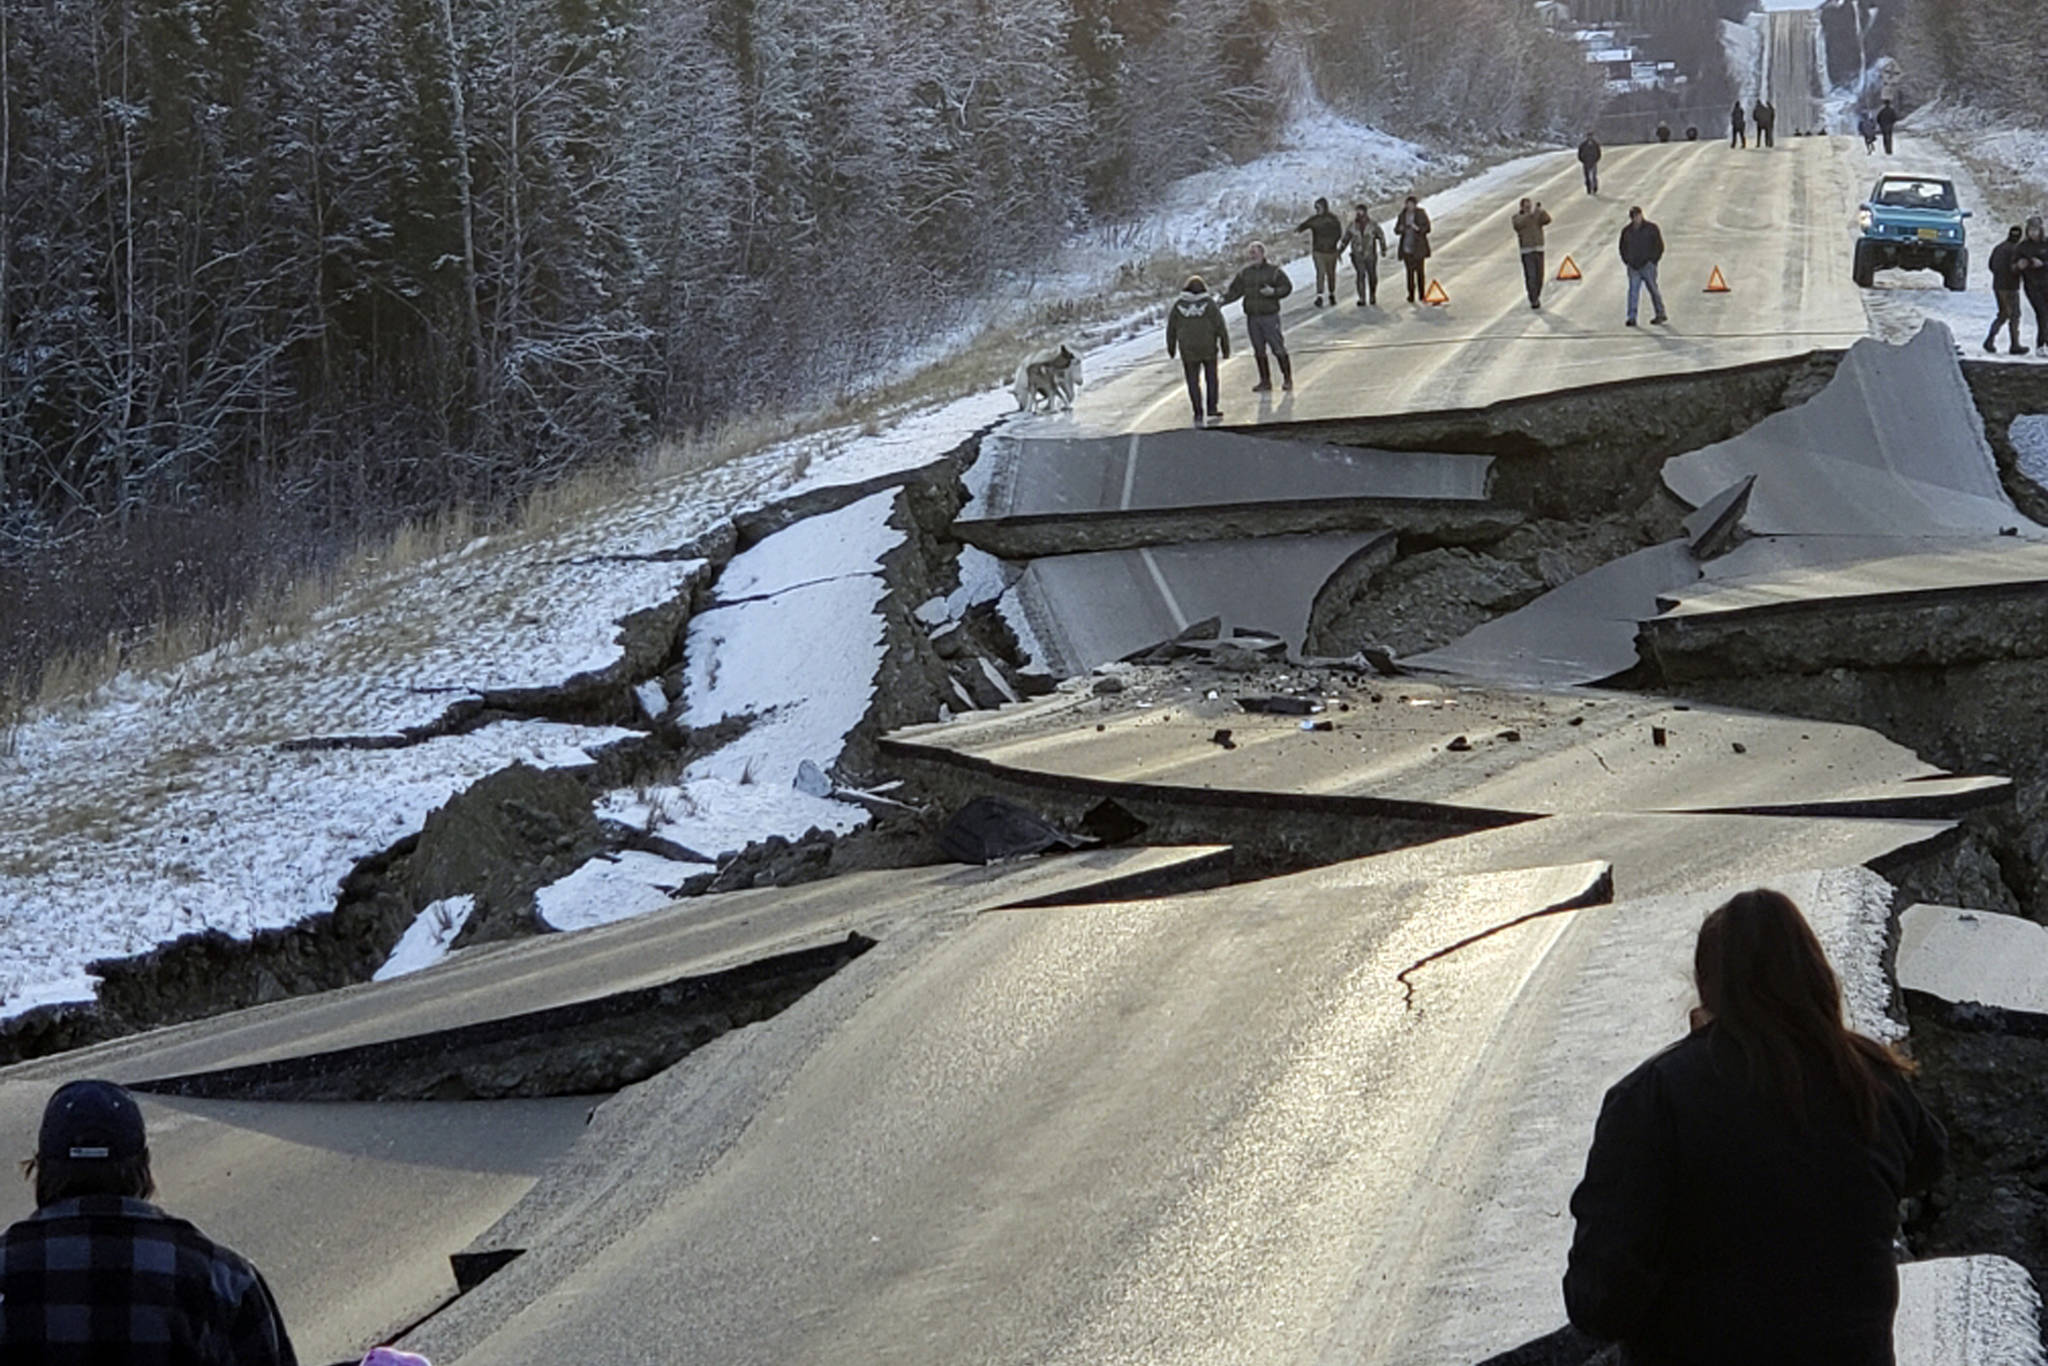 Alaska selfie-takers told to stay off quake-buckled road